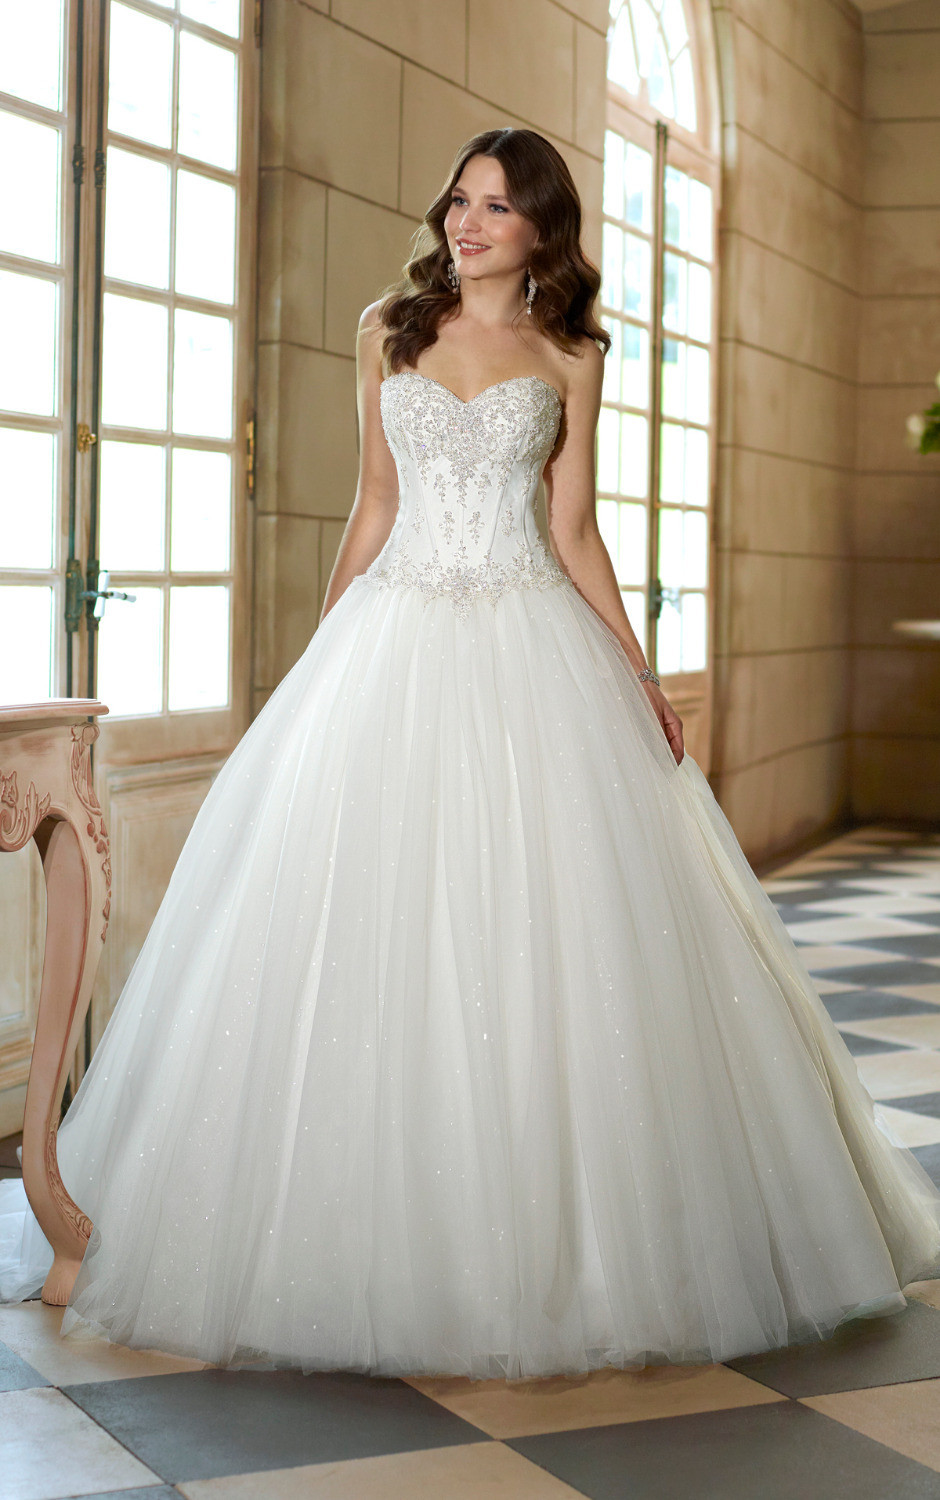 Princess Wedding Dresses
 2014 Sweetheart Beaded Lace Sparkle Ball Gown Princess